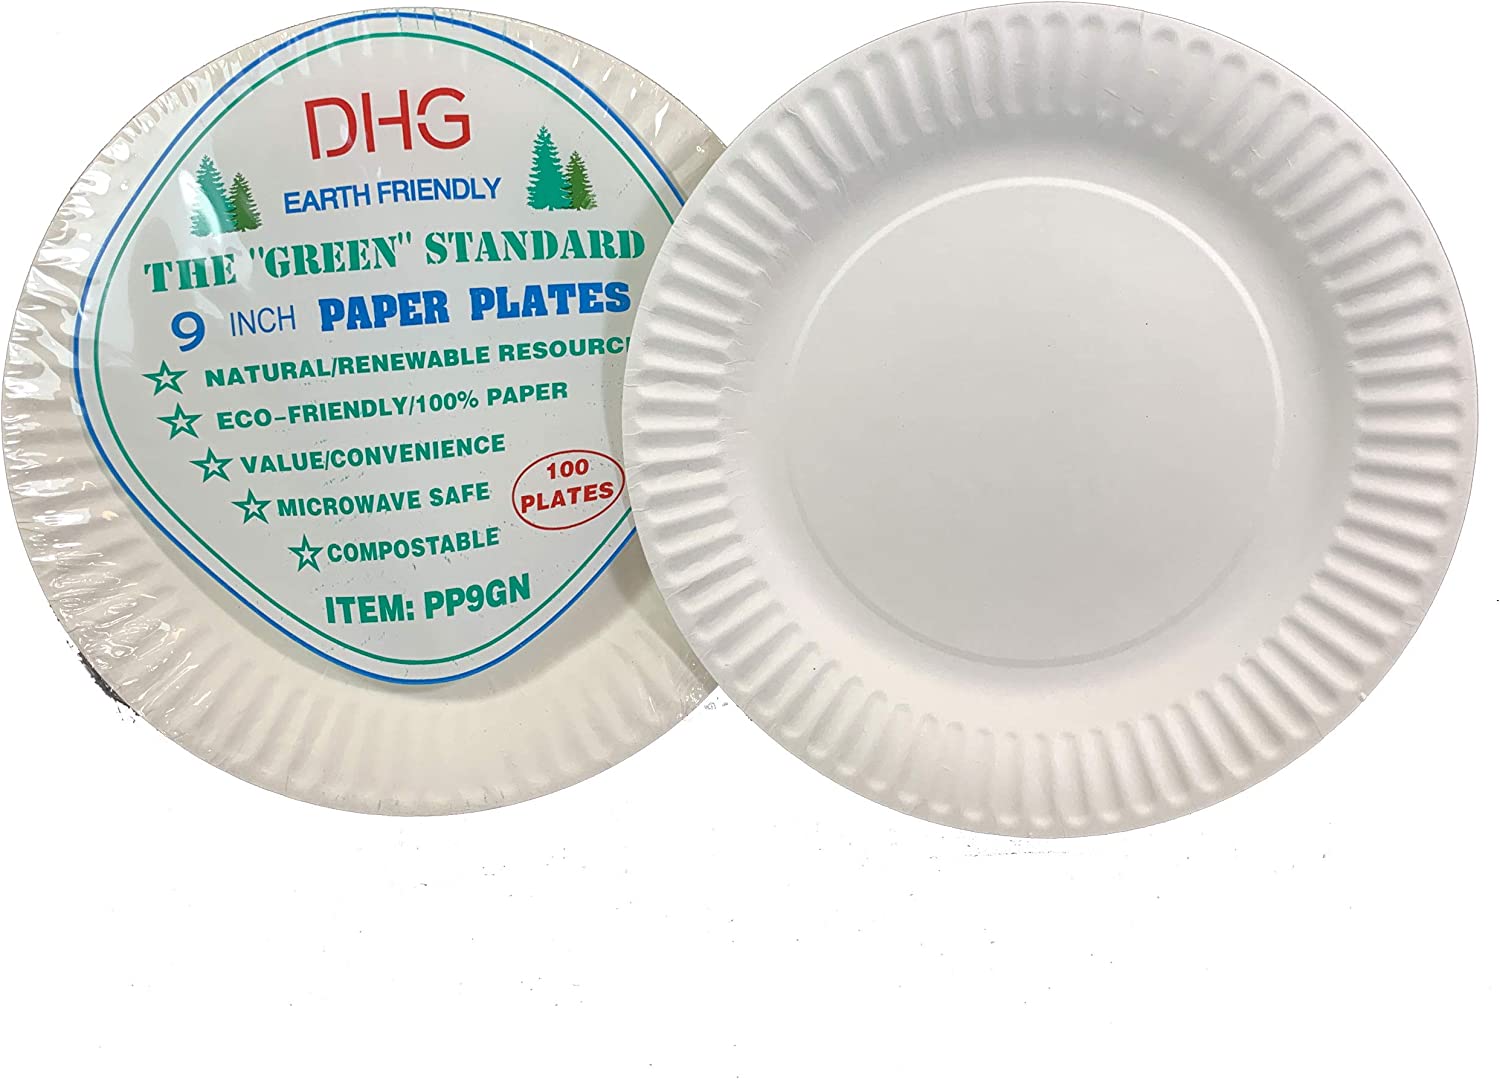 DHG PROFESSIONAL The Green Standard 9-Inch Paper Plates Uncoated, White  100 Plates 